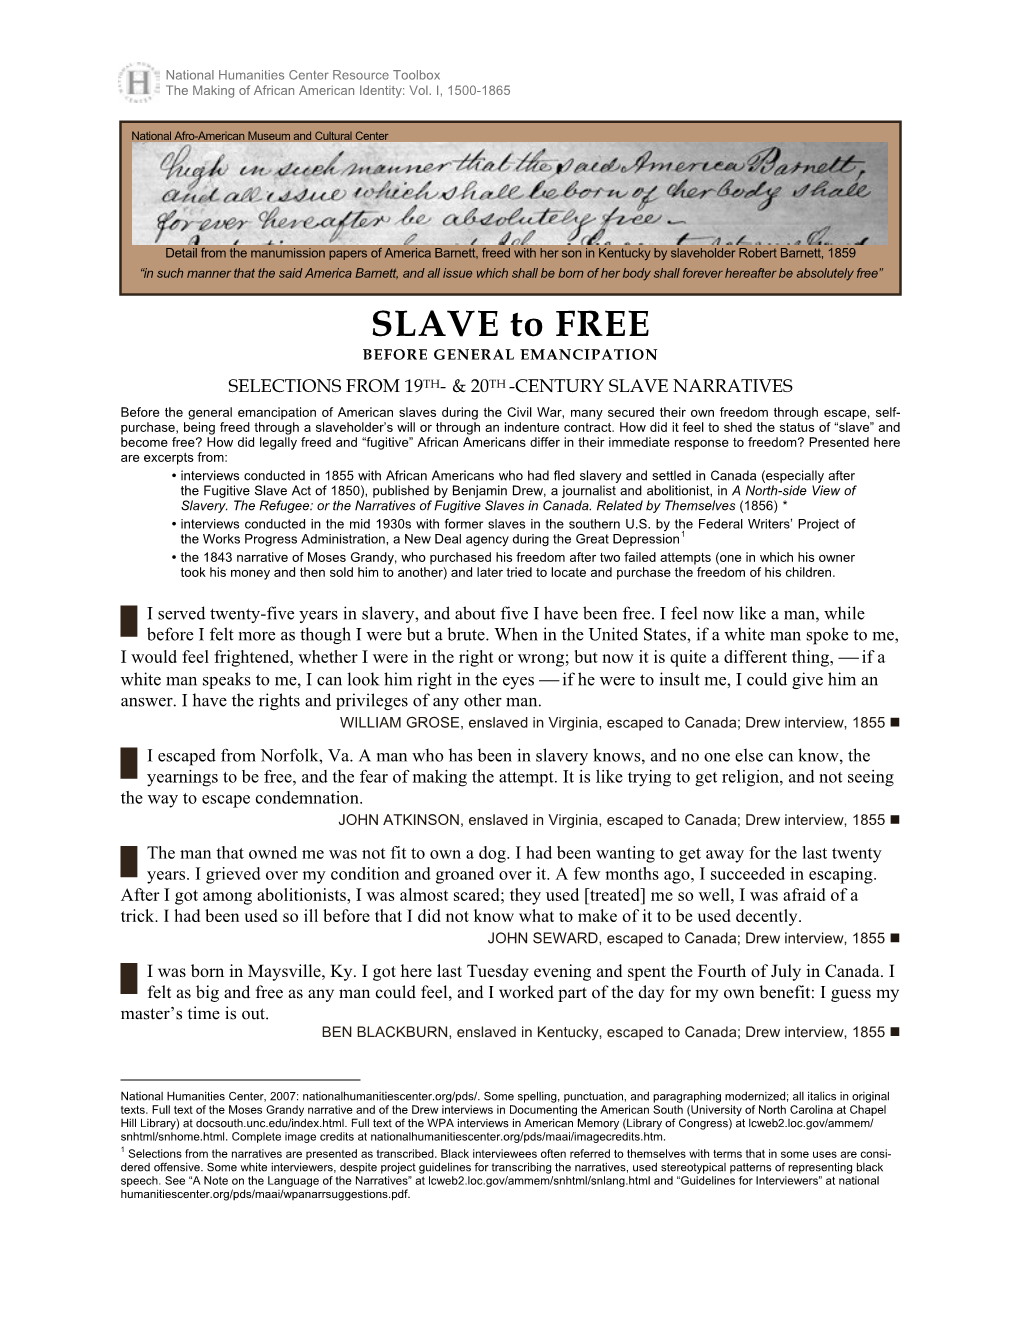 Slave to Free, Selections from 19Th- and 20Th-Century Narratives